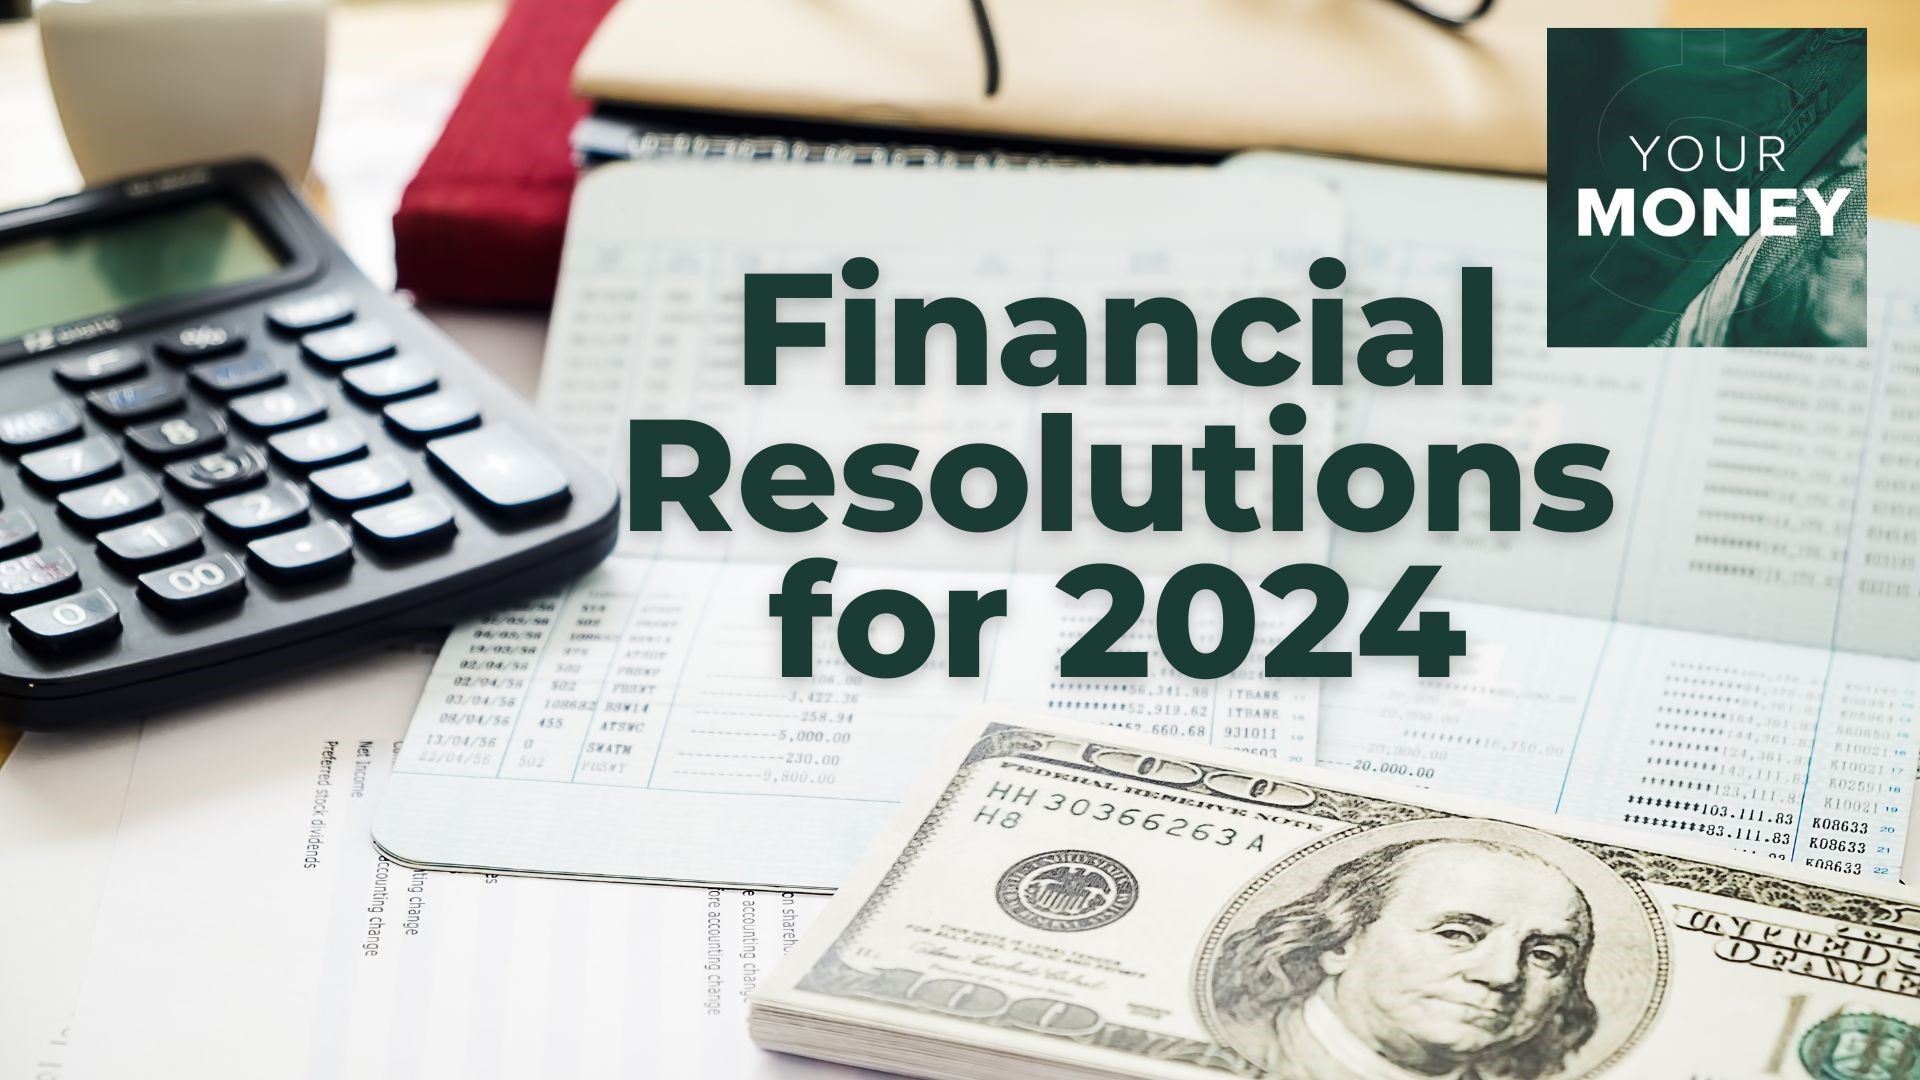 Gordon Severson shares ideas for financial resolutions for 2024. Get tips from experts on how to work on debt and get your finances in order for the new year.